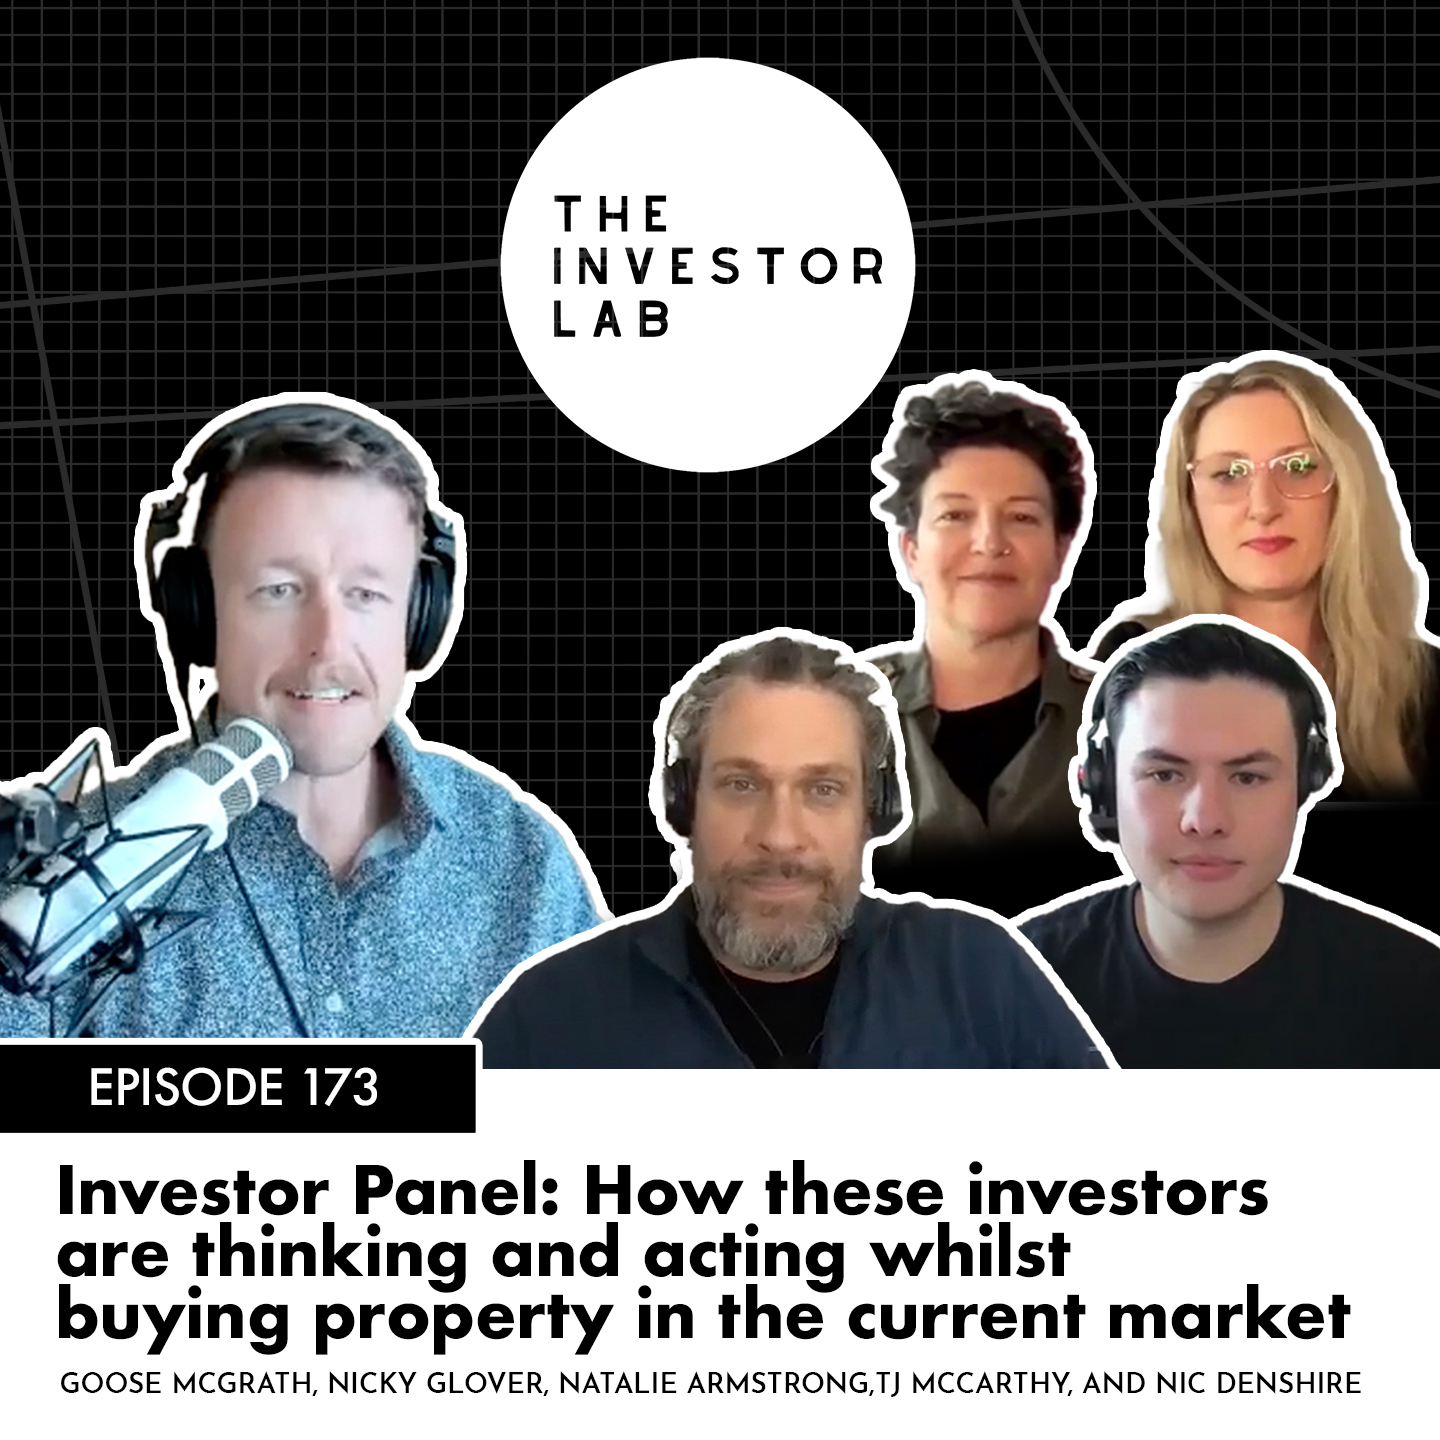 Investor Panel: How these investors are thinking and acting whilst buying property in the current market